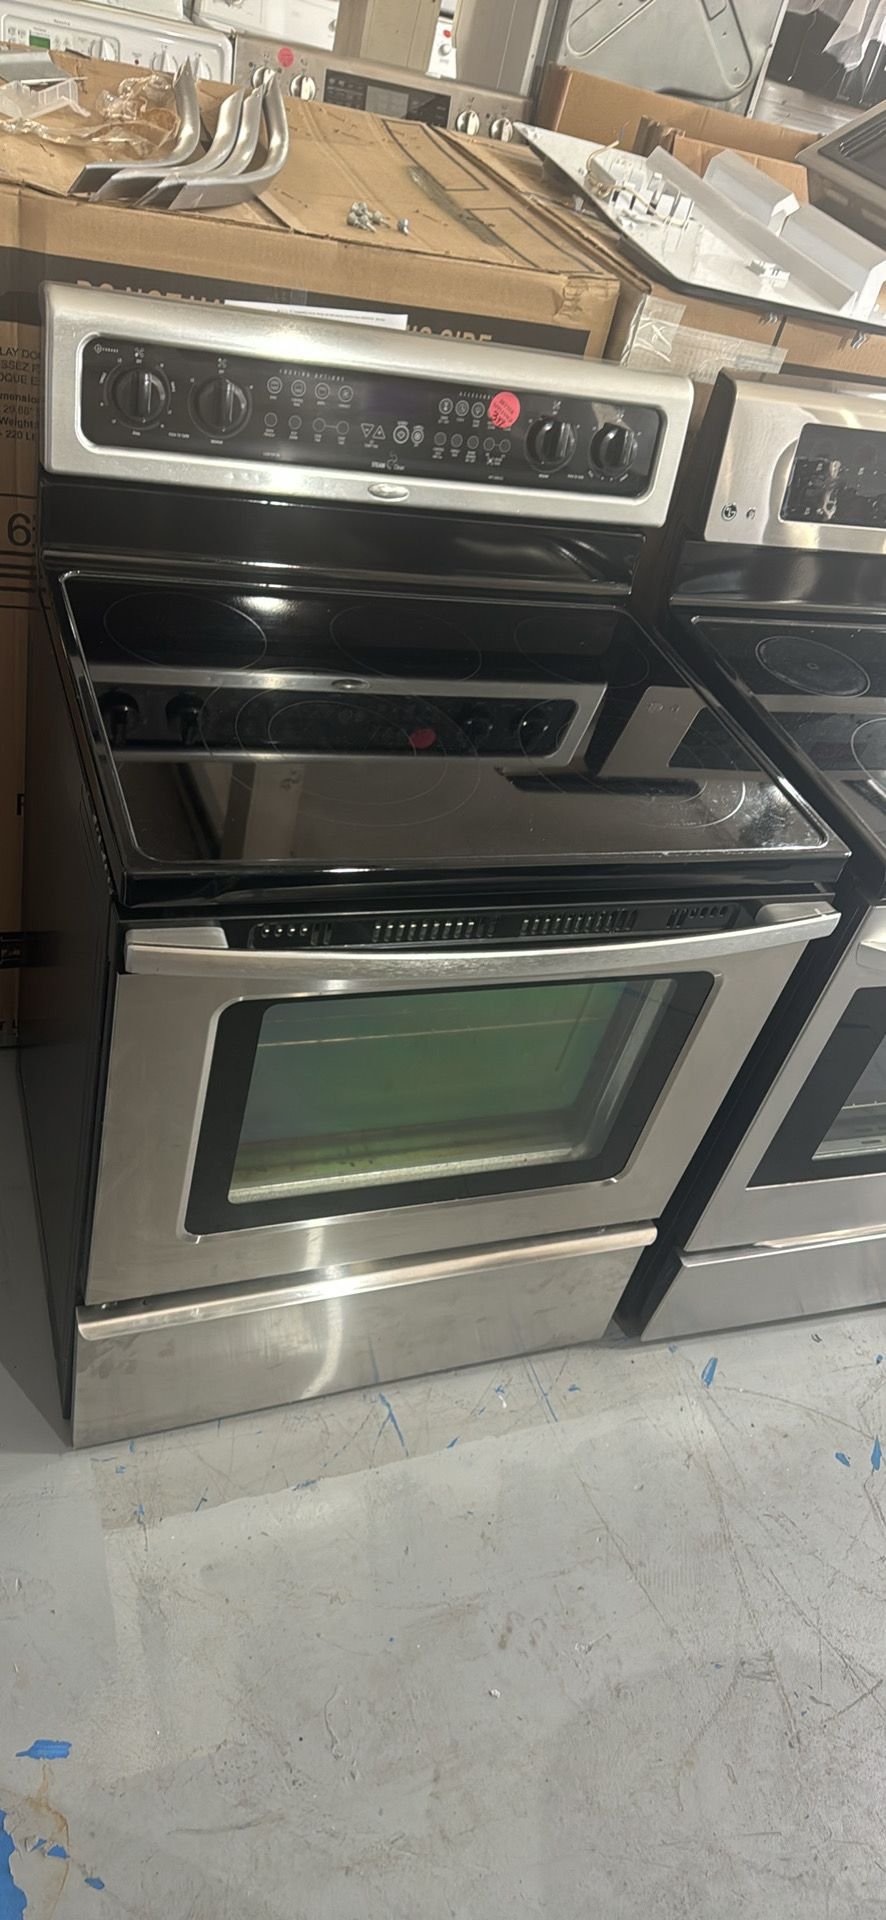 Whirlpool Used Electric Range Freestanding - Stainless